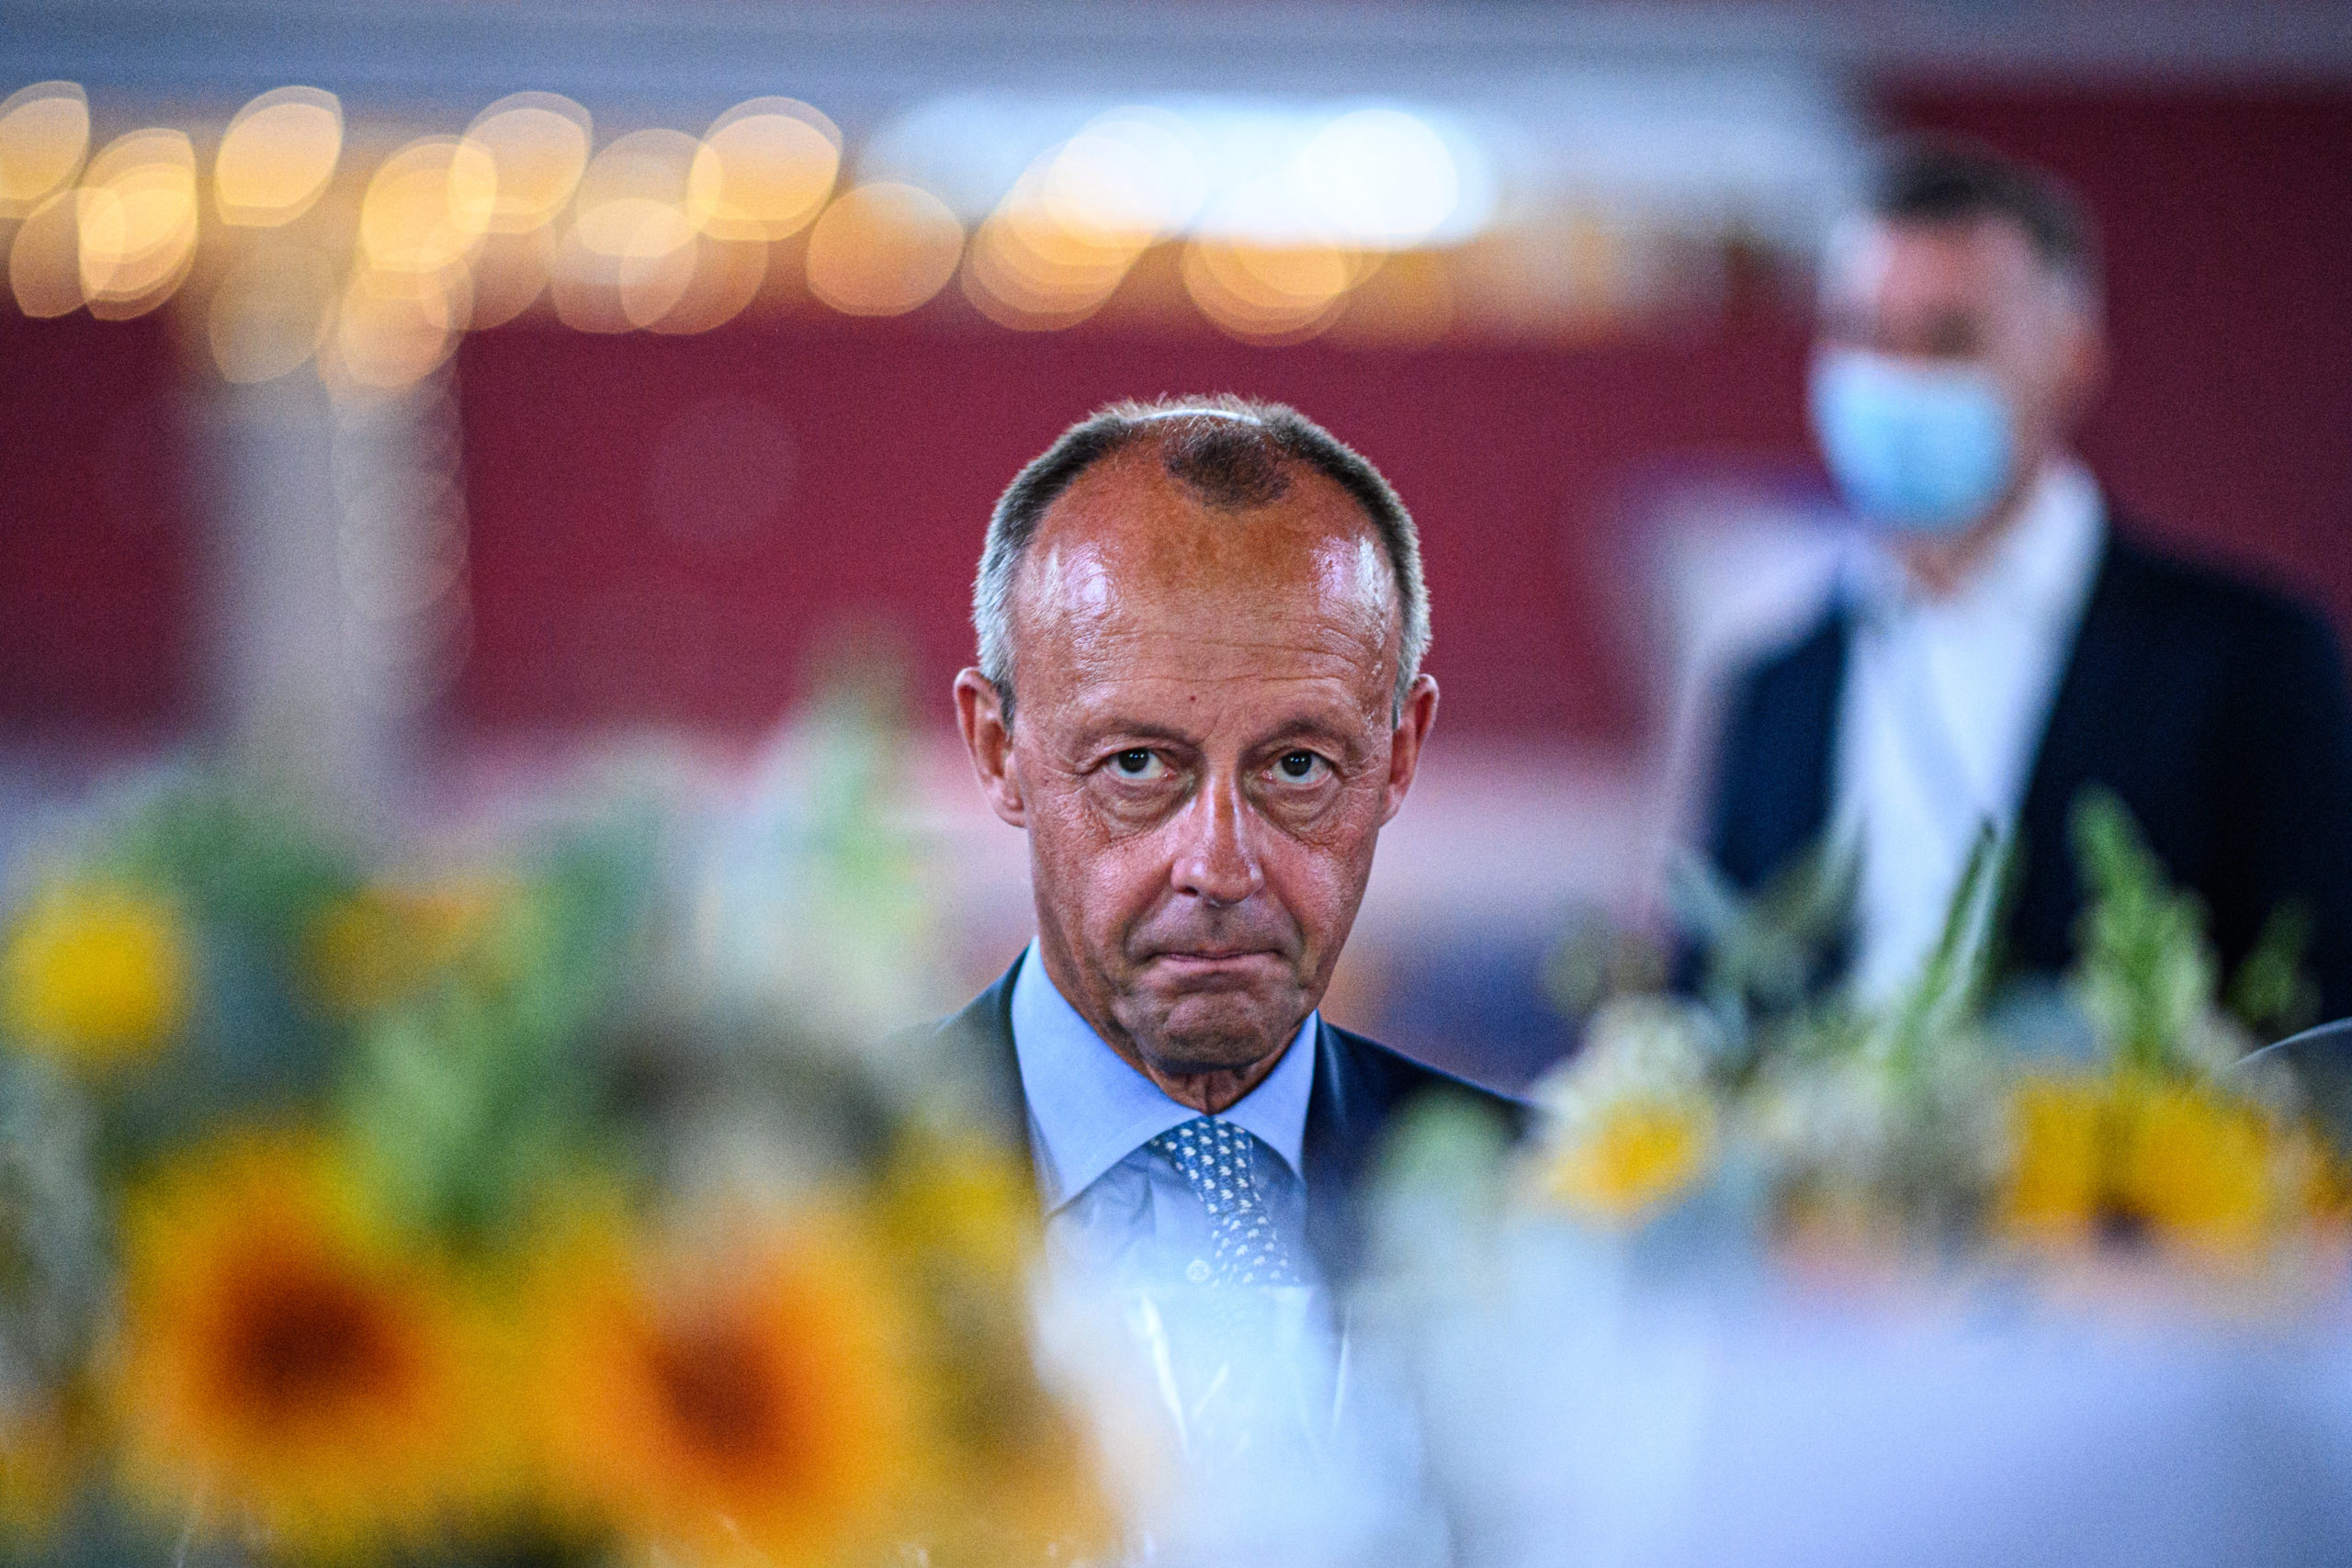 Politician Friedrich Merz, a member of the German Christian Democrats (CDU), is vying for the leadership of the party and with it a possible chancellor candidacy. 